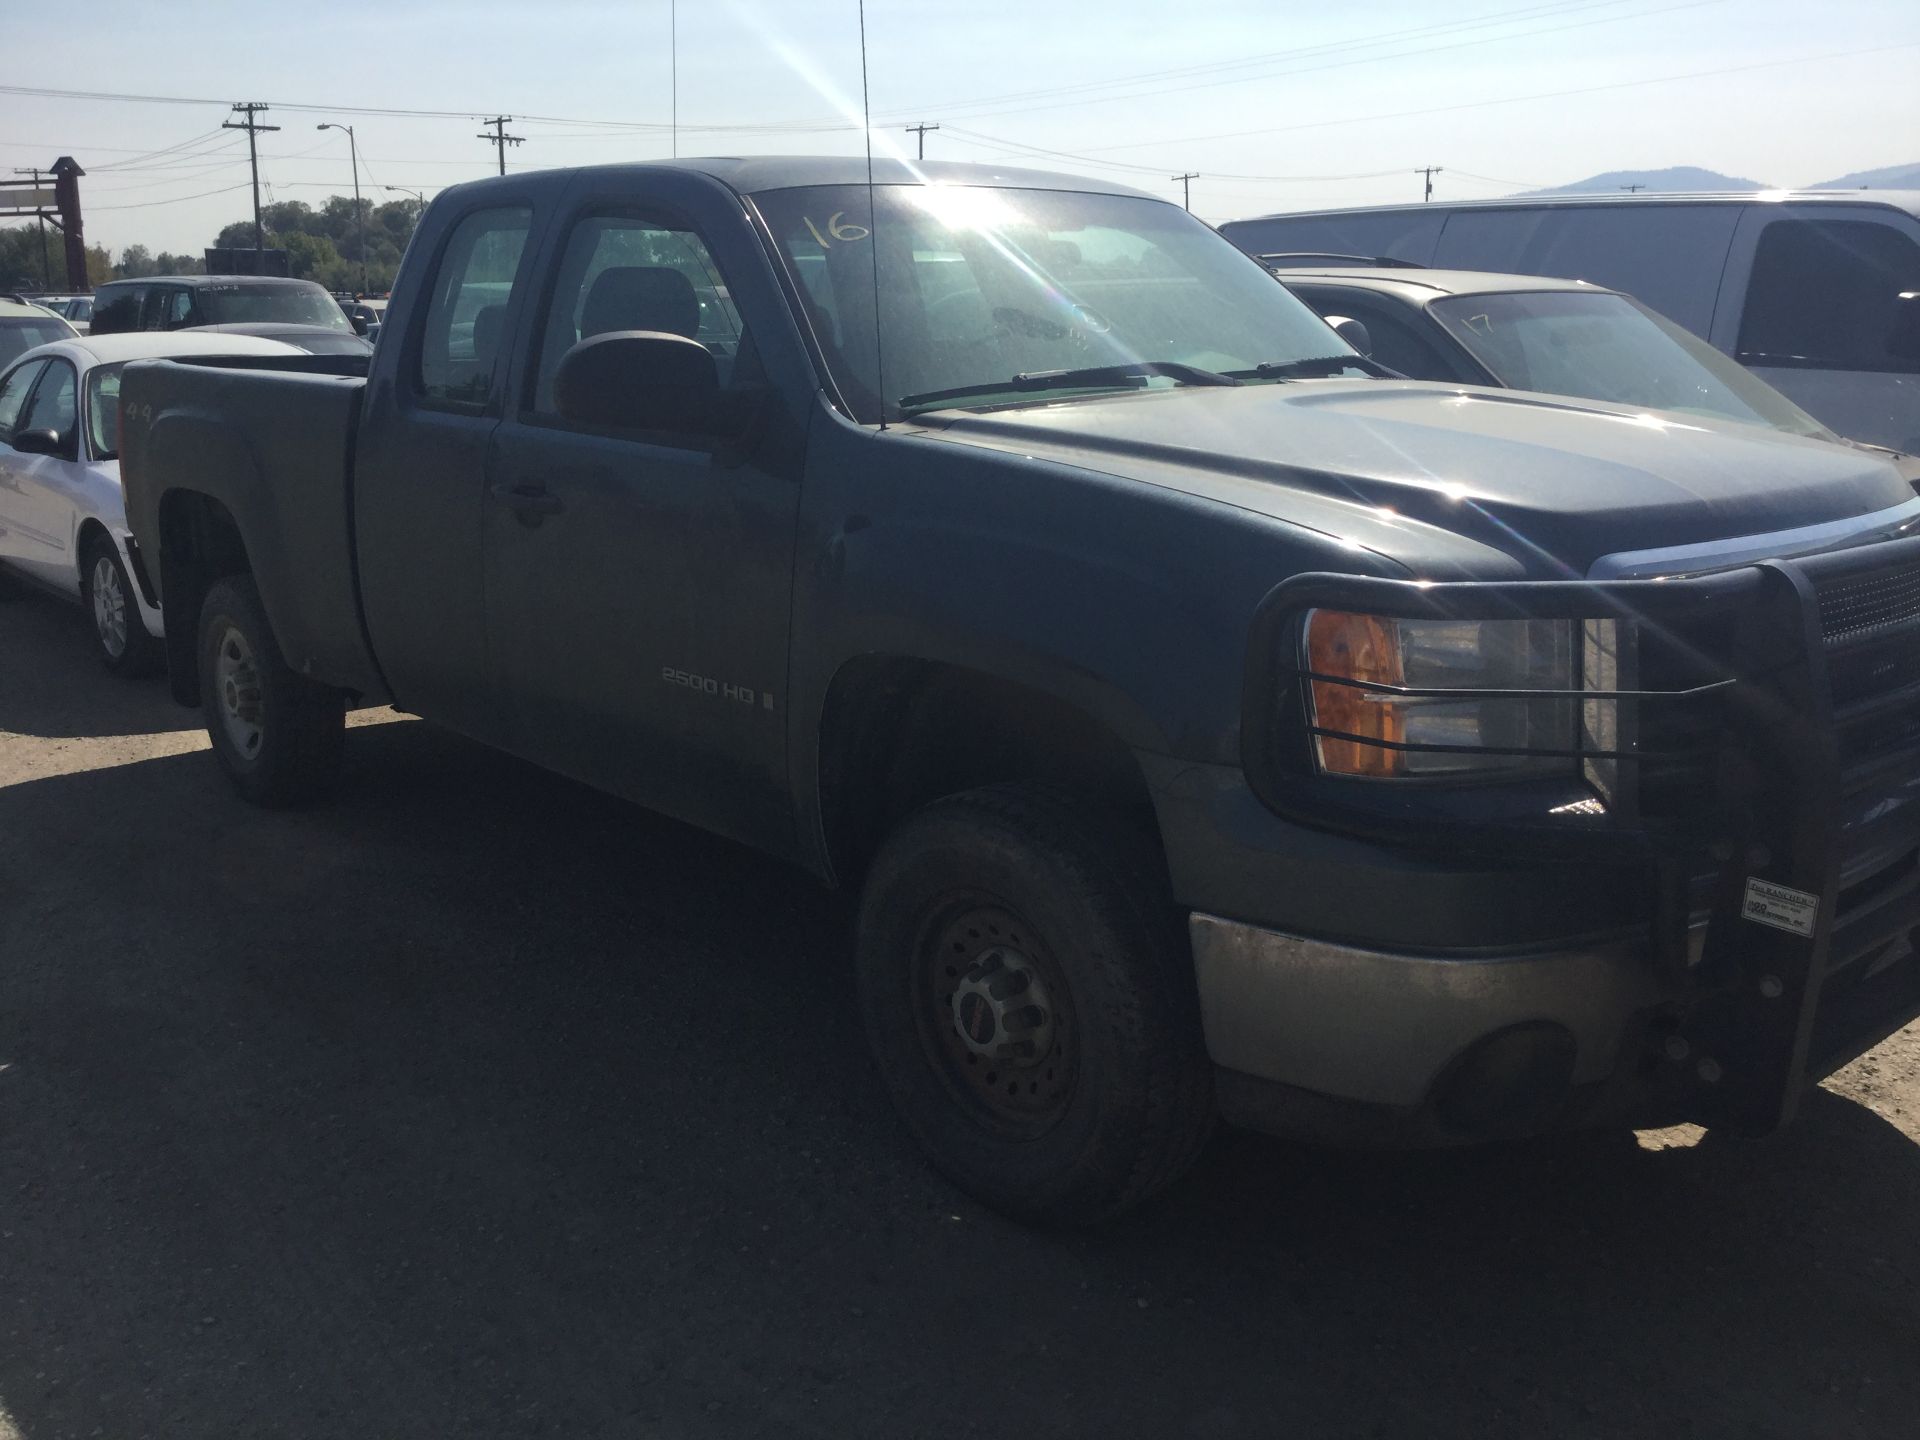 Year: 2009 Make: GMC Model: 3/4T Type: Pickup Vin#: 159350 Mileage/Hours: 161567 6.0L, 4x4, XC, - Image 3 of 4